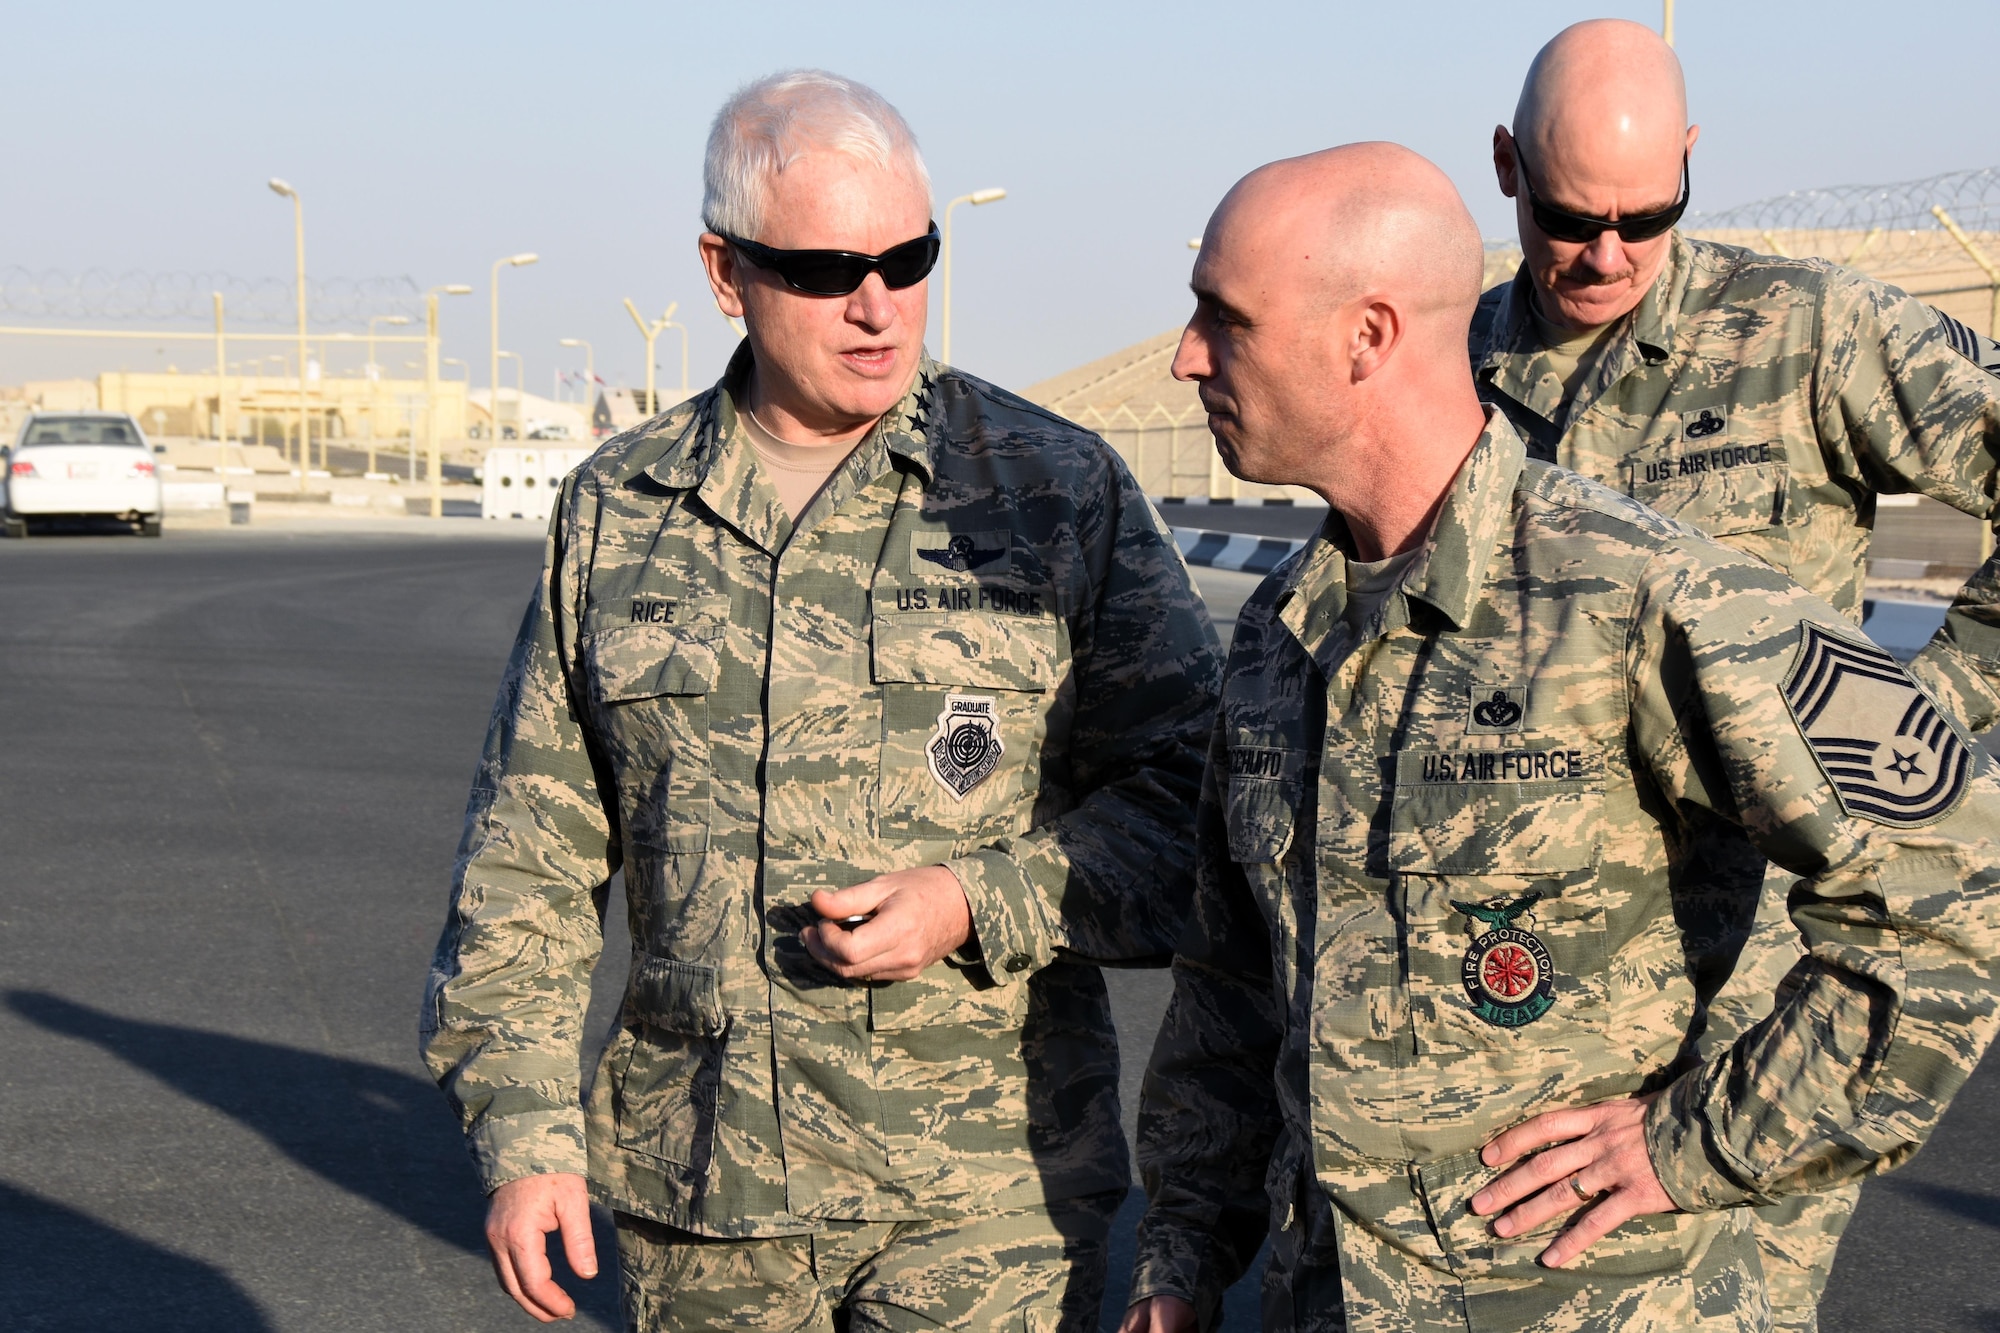 U.S. Air Force Lt. Gen. L. Scott Rice, director of the Air National Guard, meets with Airmen with the 379th Expeditionary Civil Engineer Squadron at Fire Station 3, Al Udeid Air Base, Qatar, Jan. 4, 2016. Rice expressed his gratitude for those serving in the deployed environment and for their continued patriotism. (U.S. Air Force photo by Senior Airman Cynthia A. Innocenti)